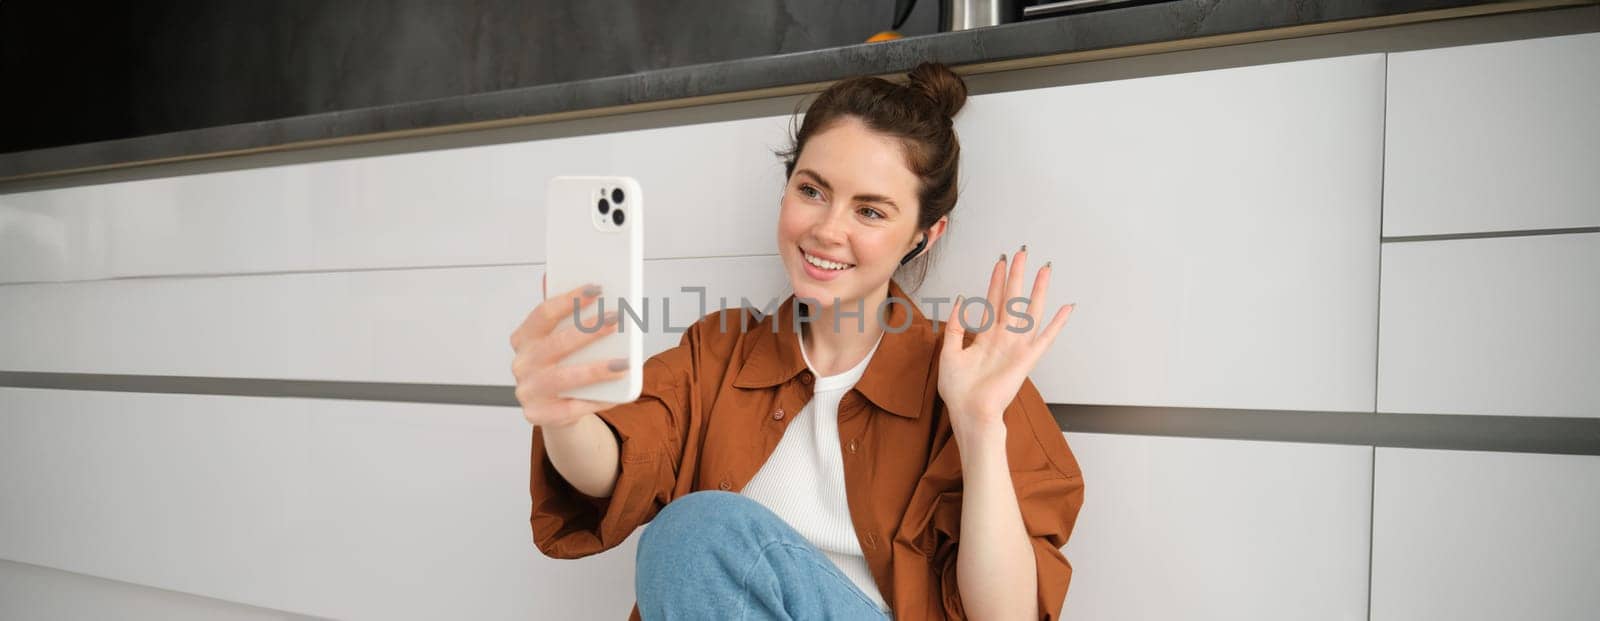 Portrait of happy smiling woman video chats, sits on kitchen floor at home, talking to friend on social media app using smartphone.